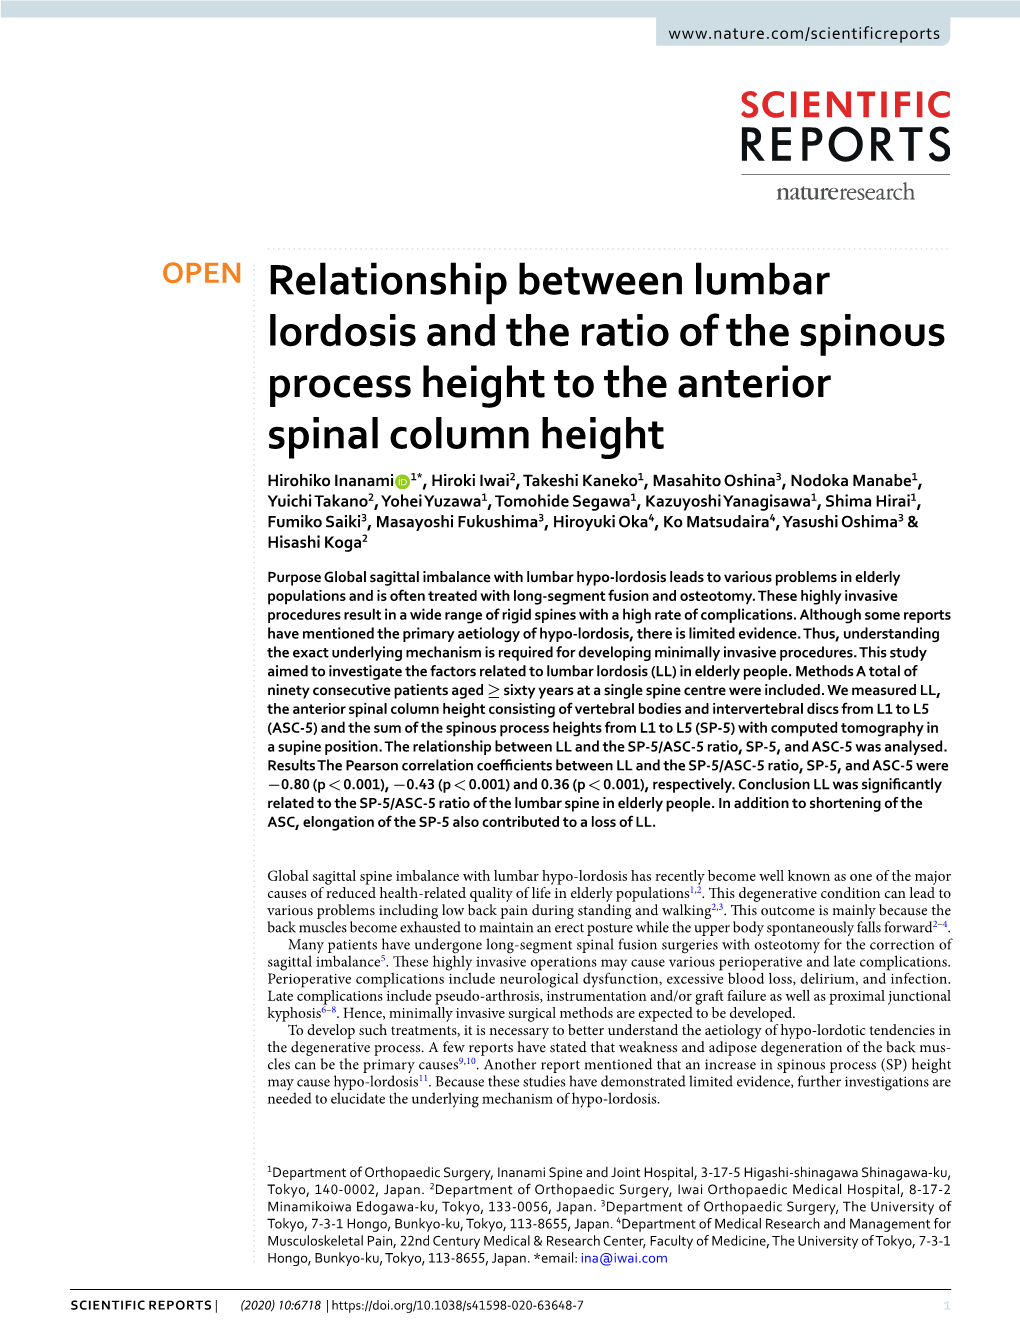 Relationship Between Lumbar Lordosis and the Ratio of the Spinous Process Height to the Anterior Spinal Column Height